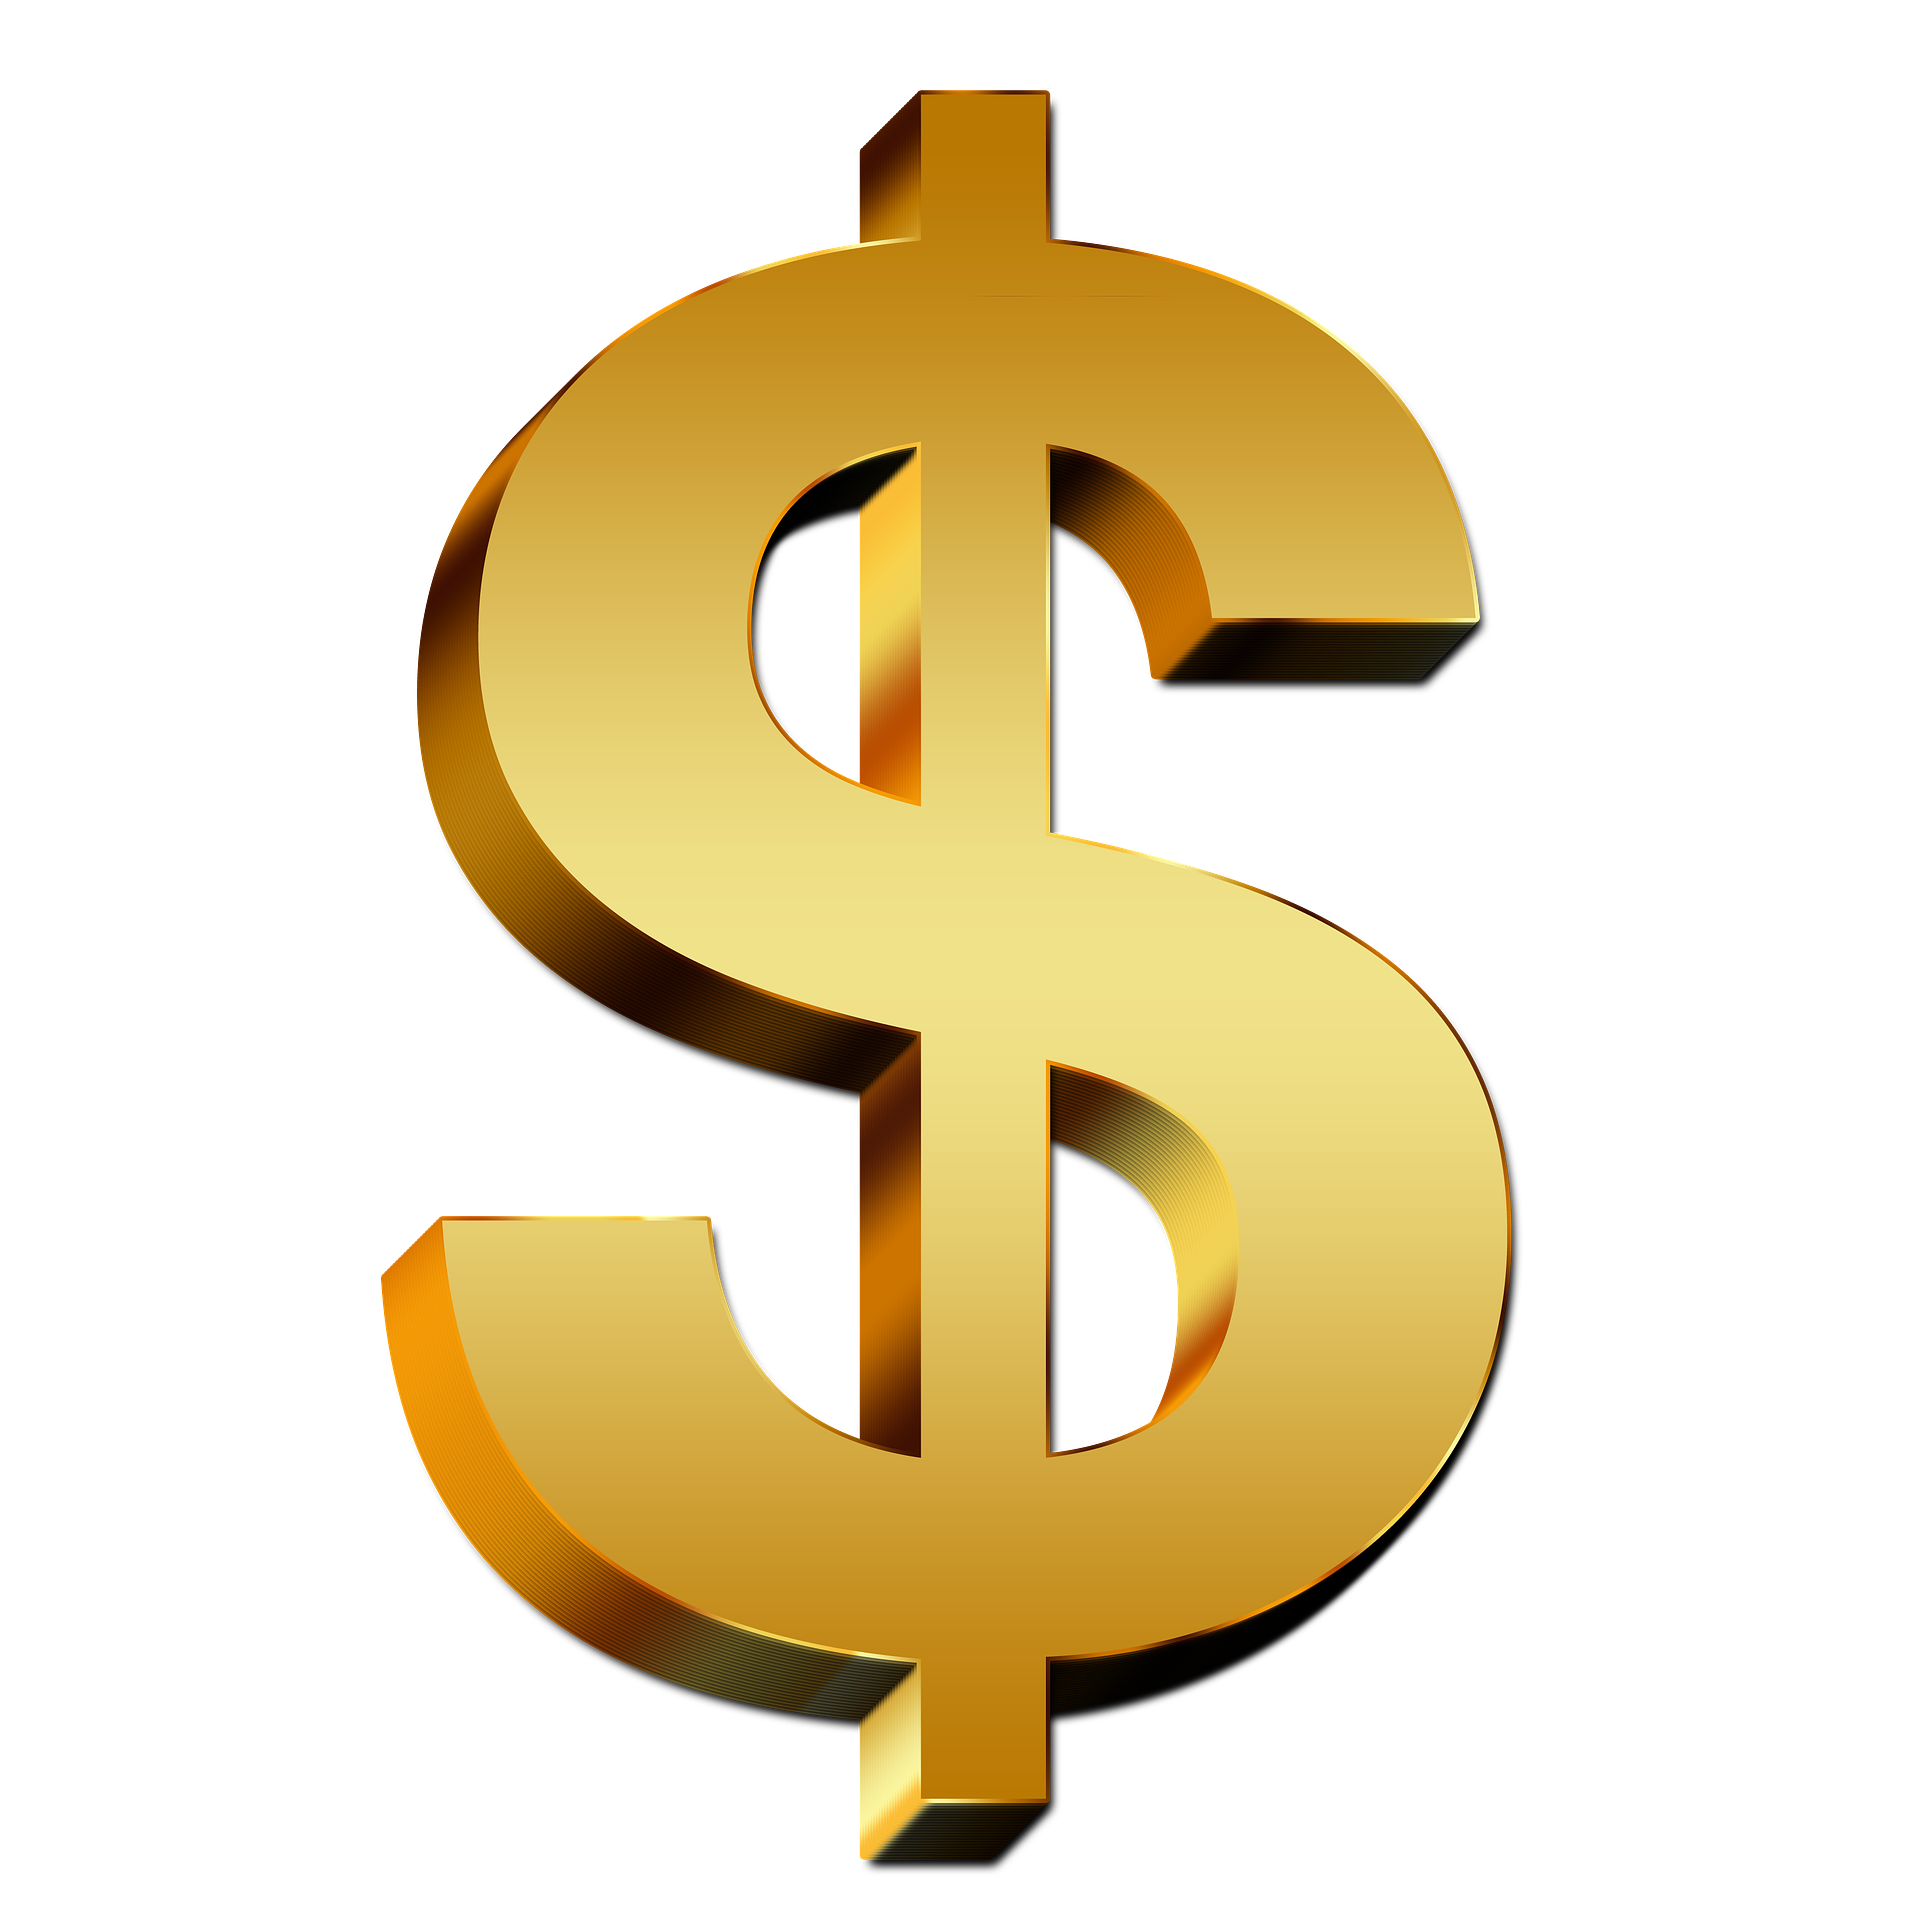 United Money Symbol Dollar Sign States Currency PNG Image